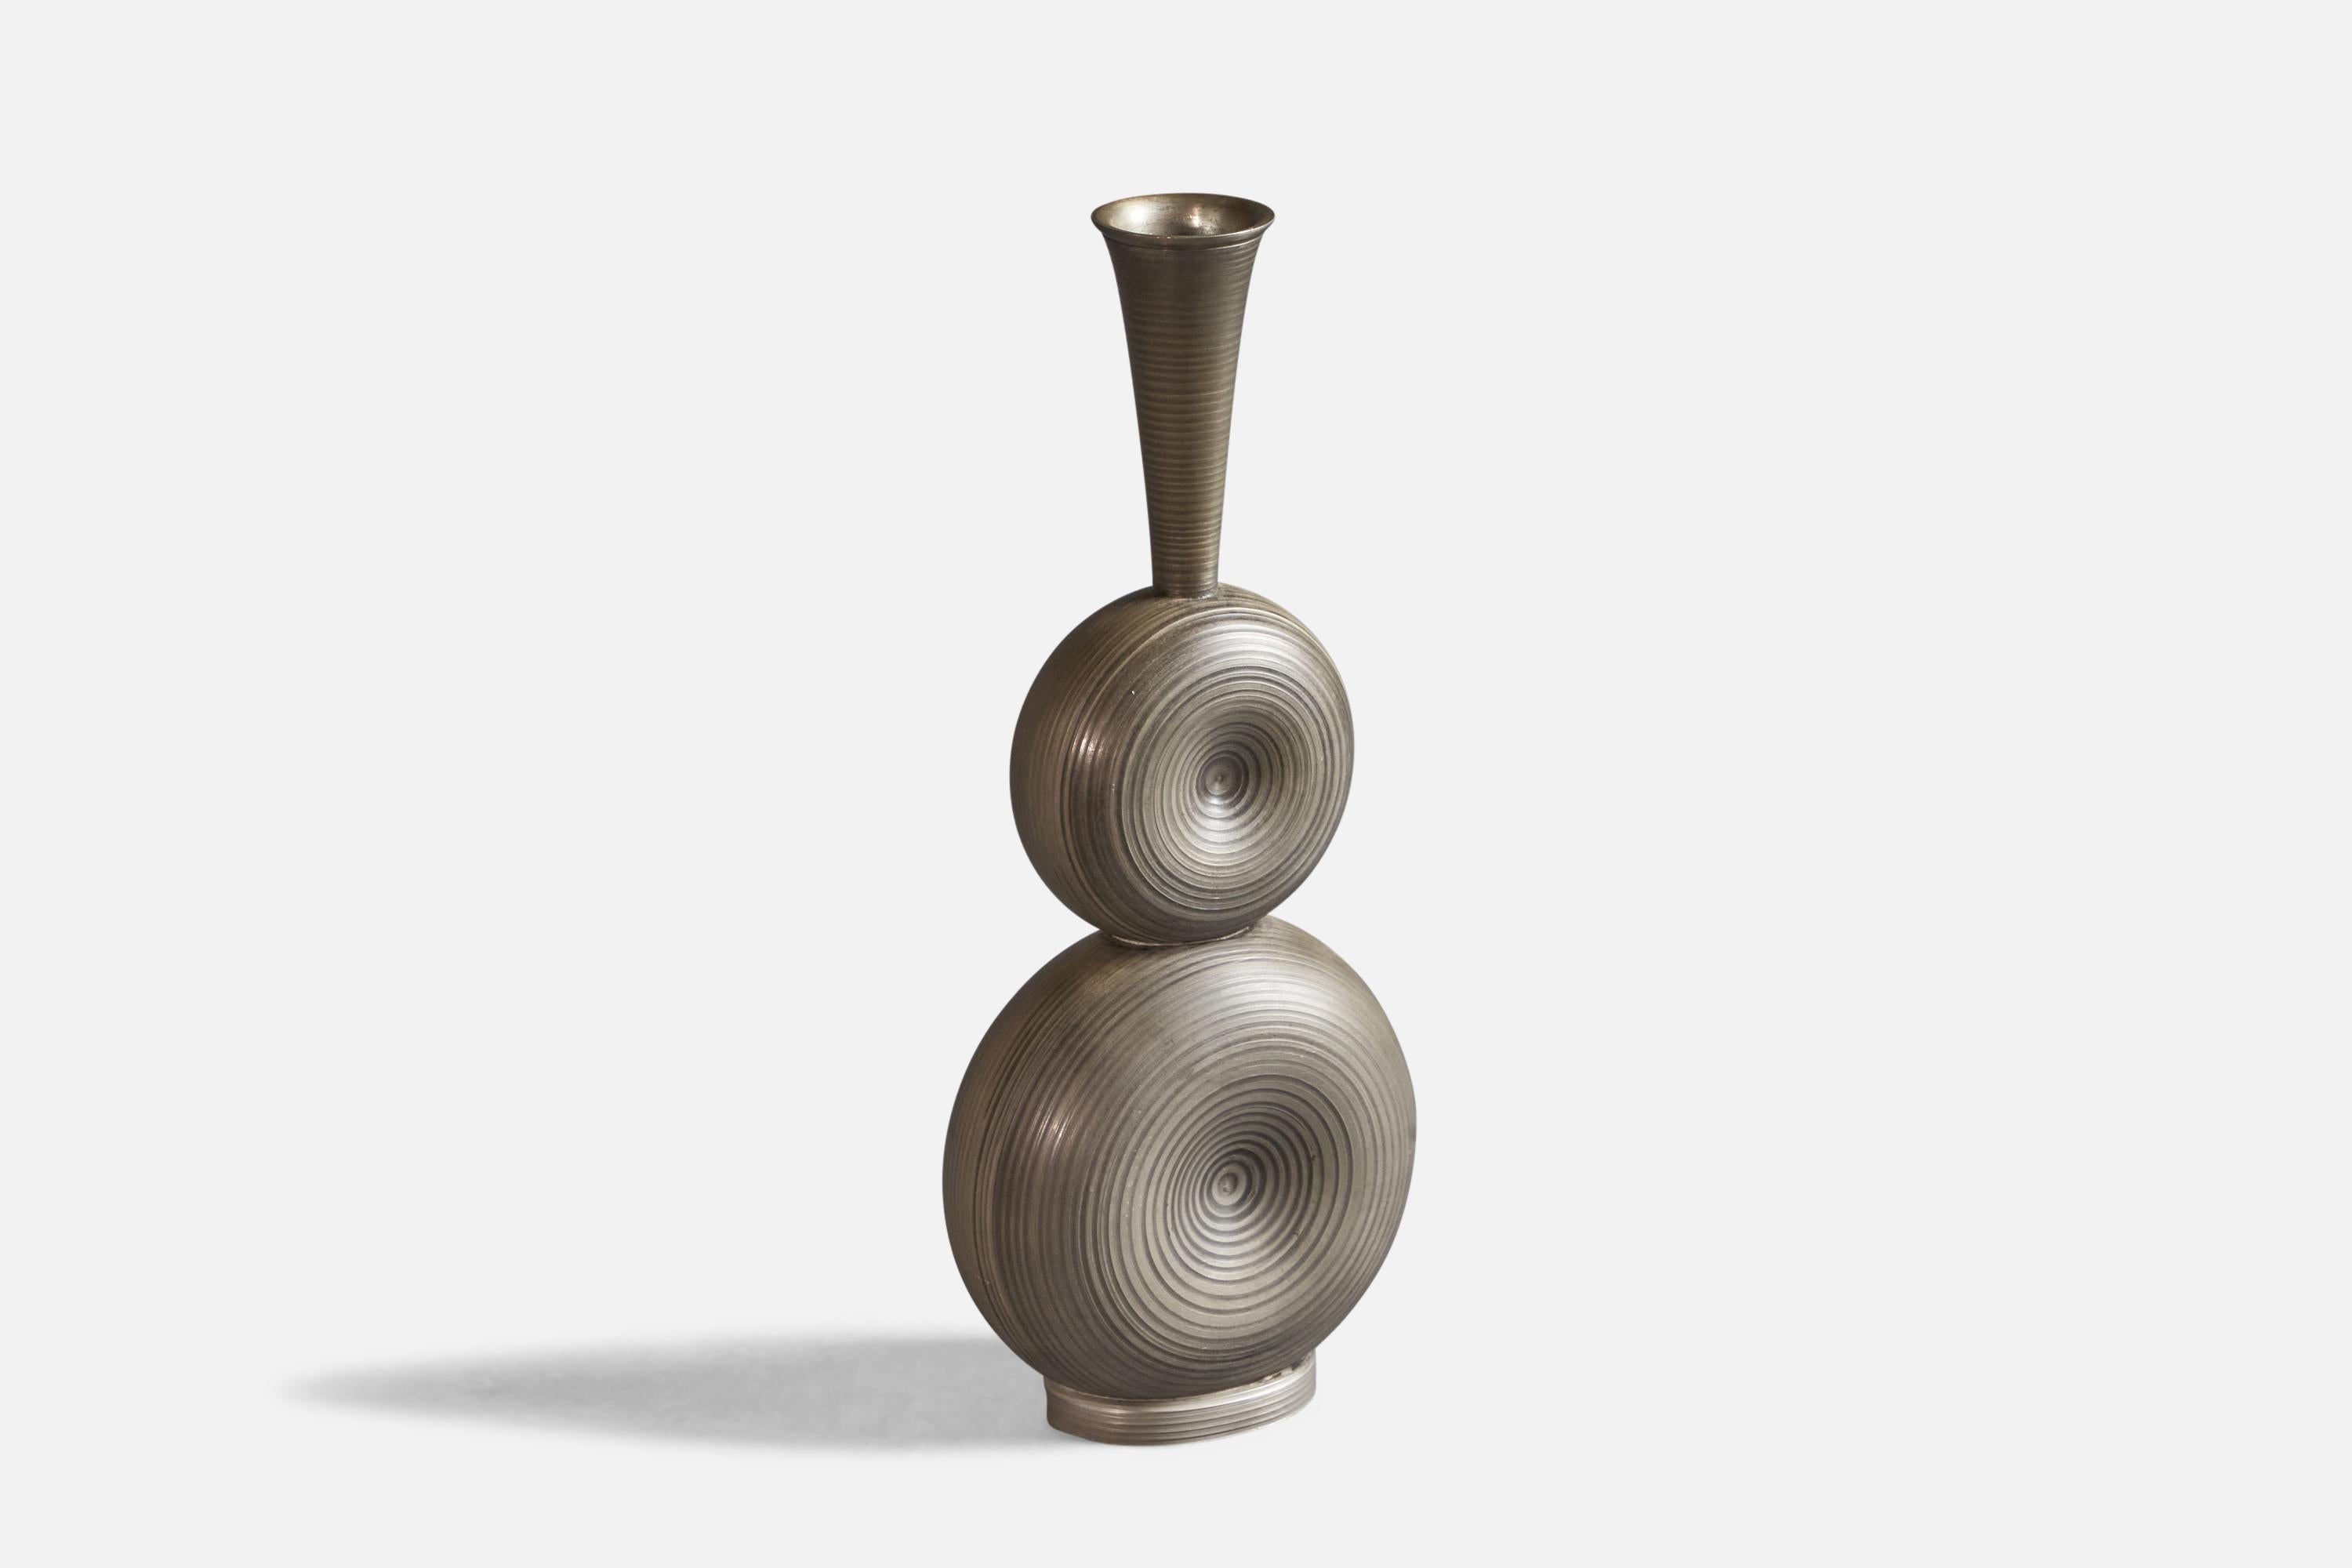 A pewter bottle or vase, designed and produced by Gunnar Havstad, Norway, c. 1950s.